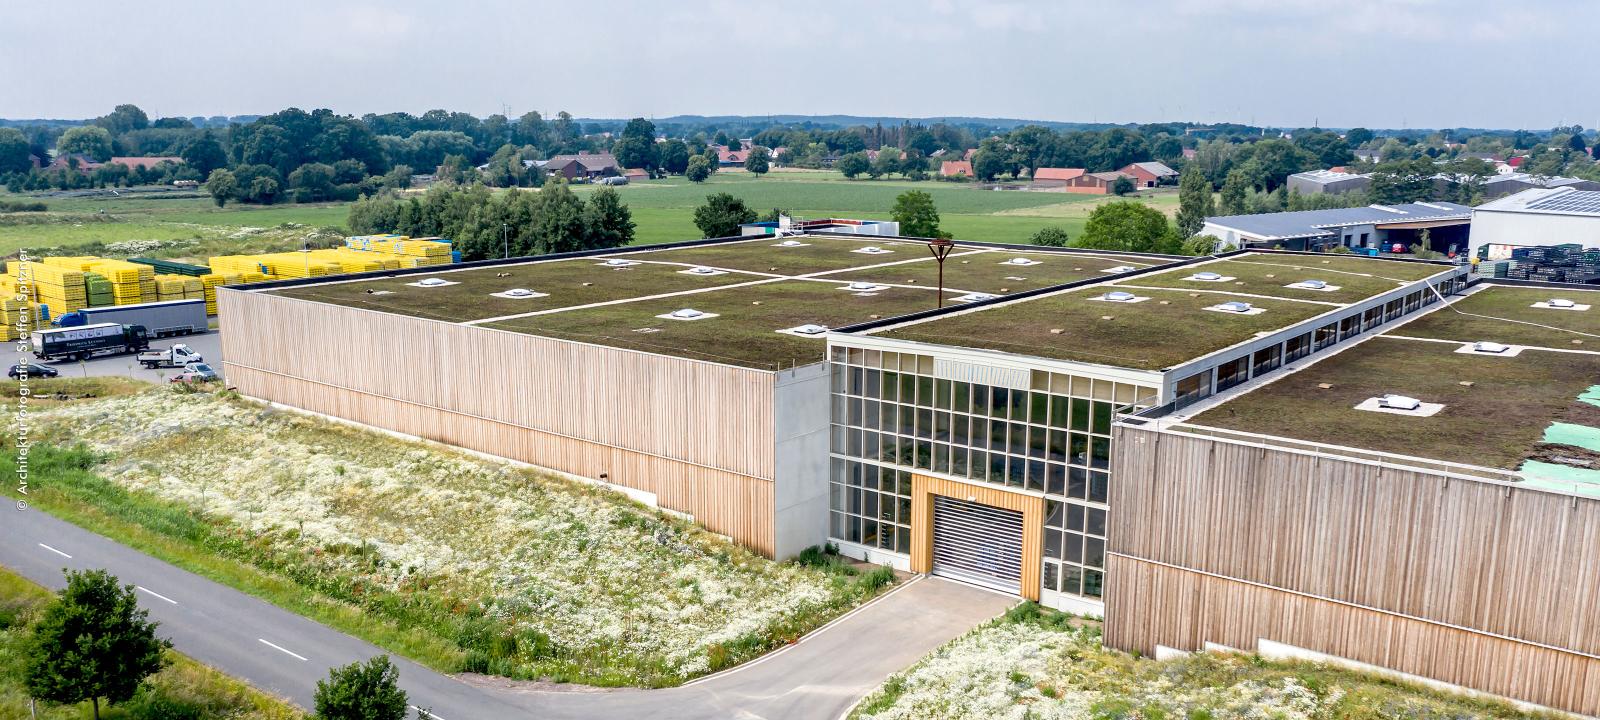 Building with a green roof